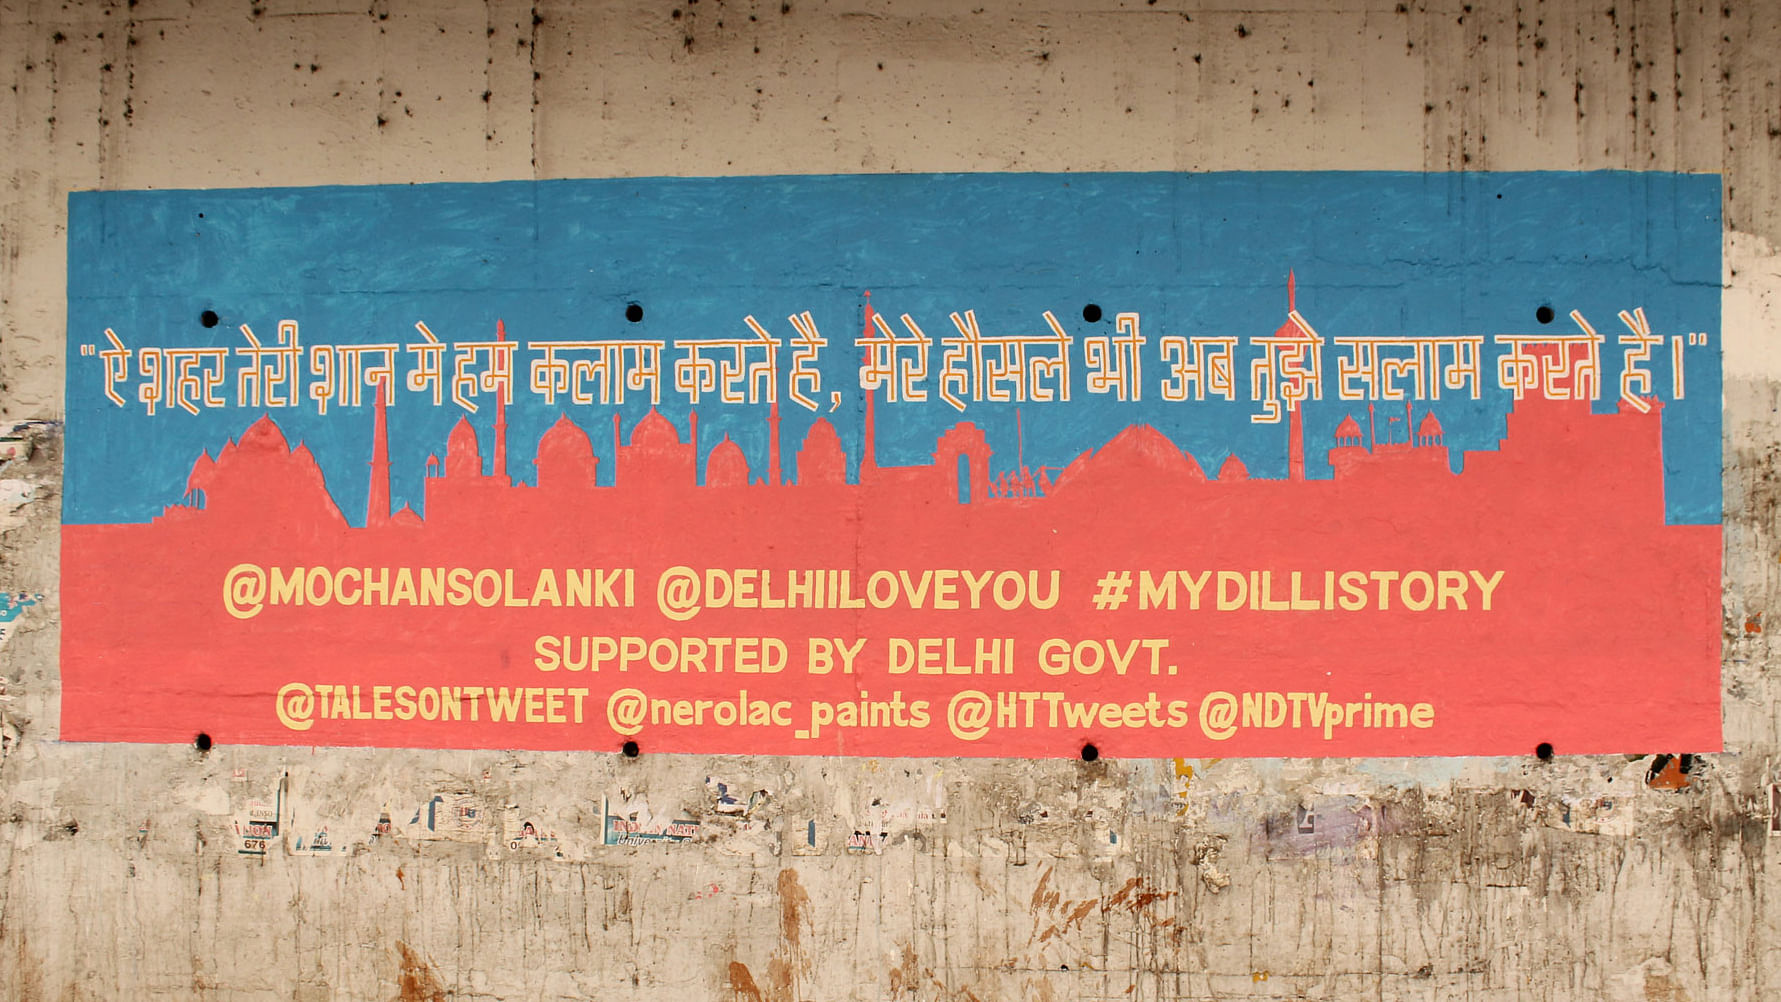 Delhi, I Love You has started a wall painting initiative to protect the livelihood of signboard painters. (Photo: The Quint)